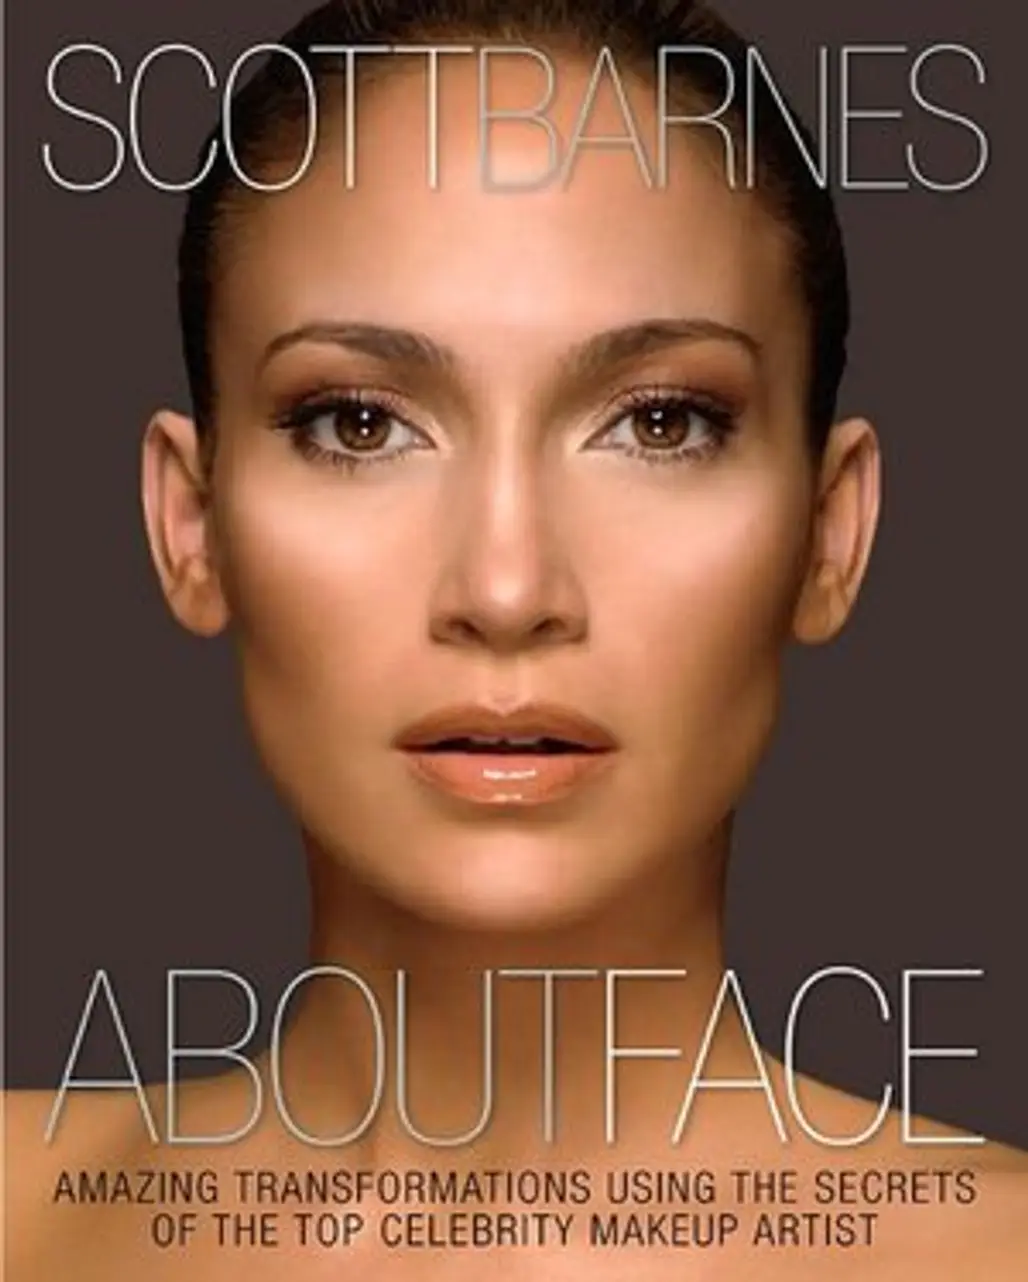 About Face: Amazing Transformations Using the Secrets of the Top Celebrity Makeup Artist by Scott Barnes